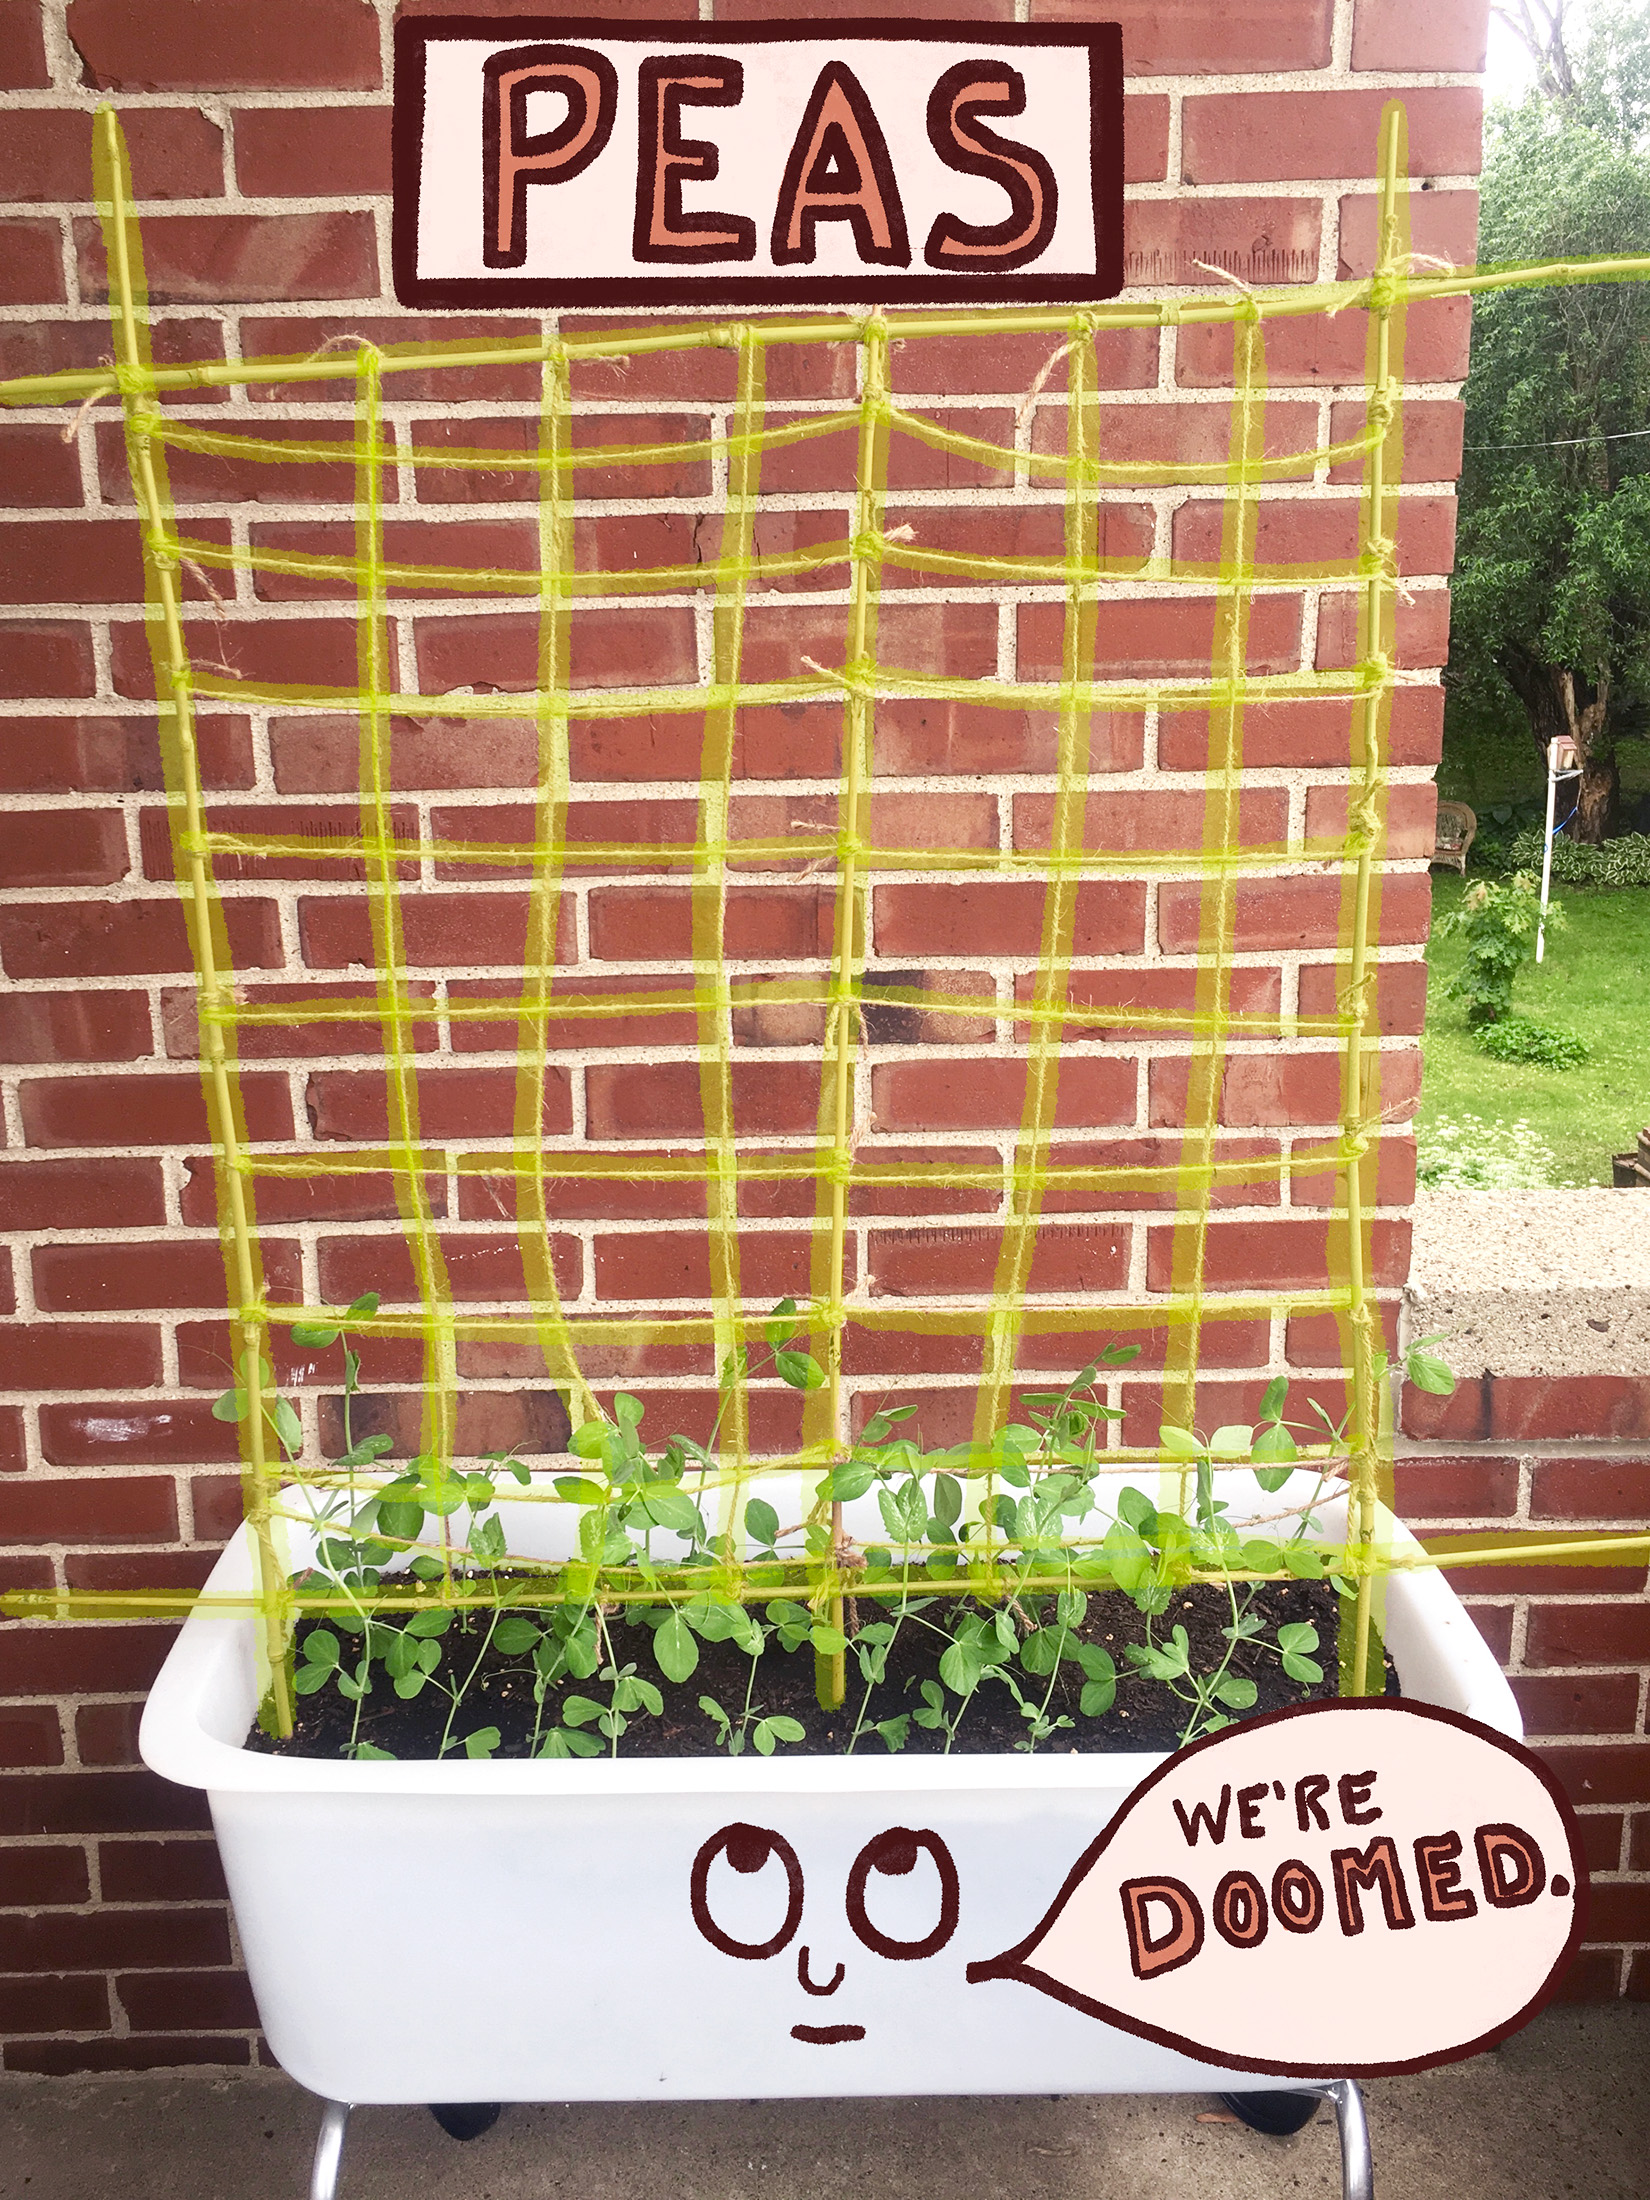 A planter of pea seedlings with cartoon overlay of an animated face saying "We're doomed."